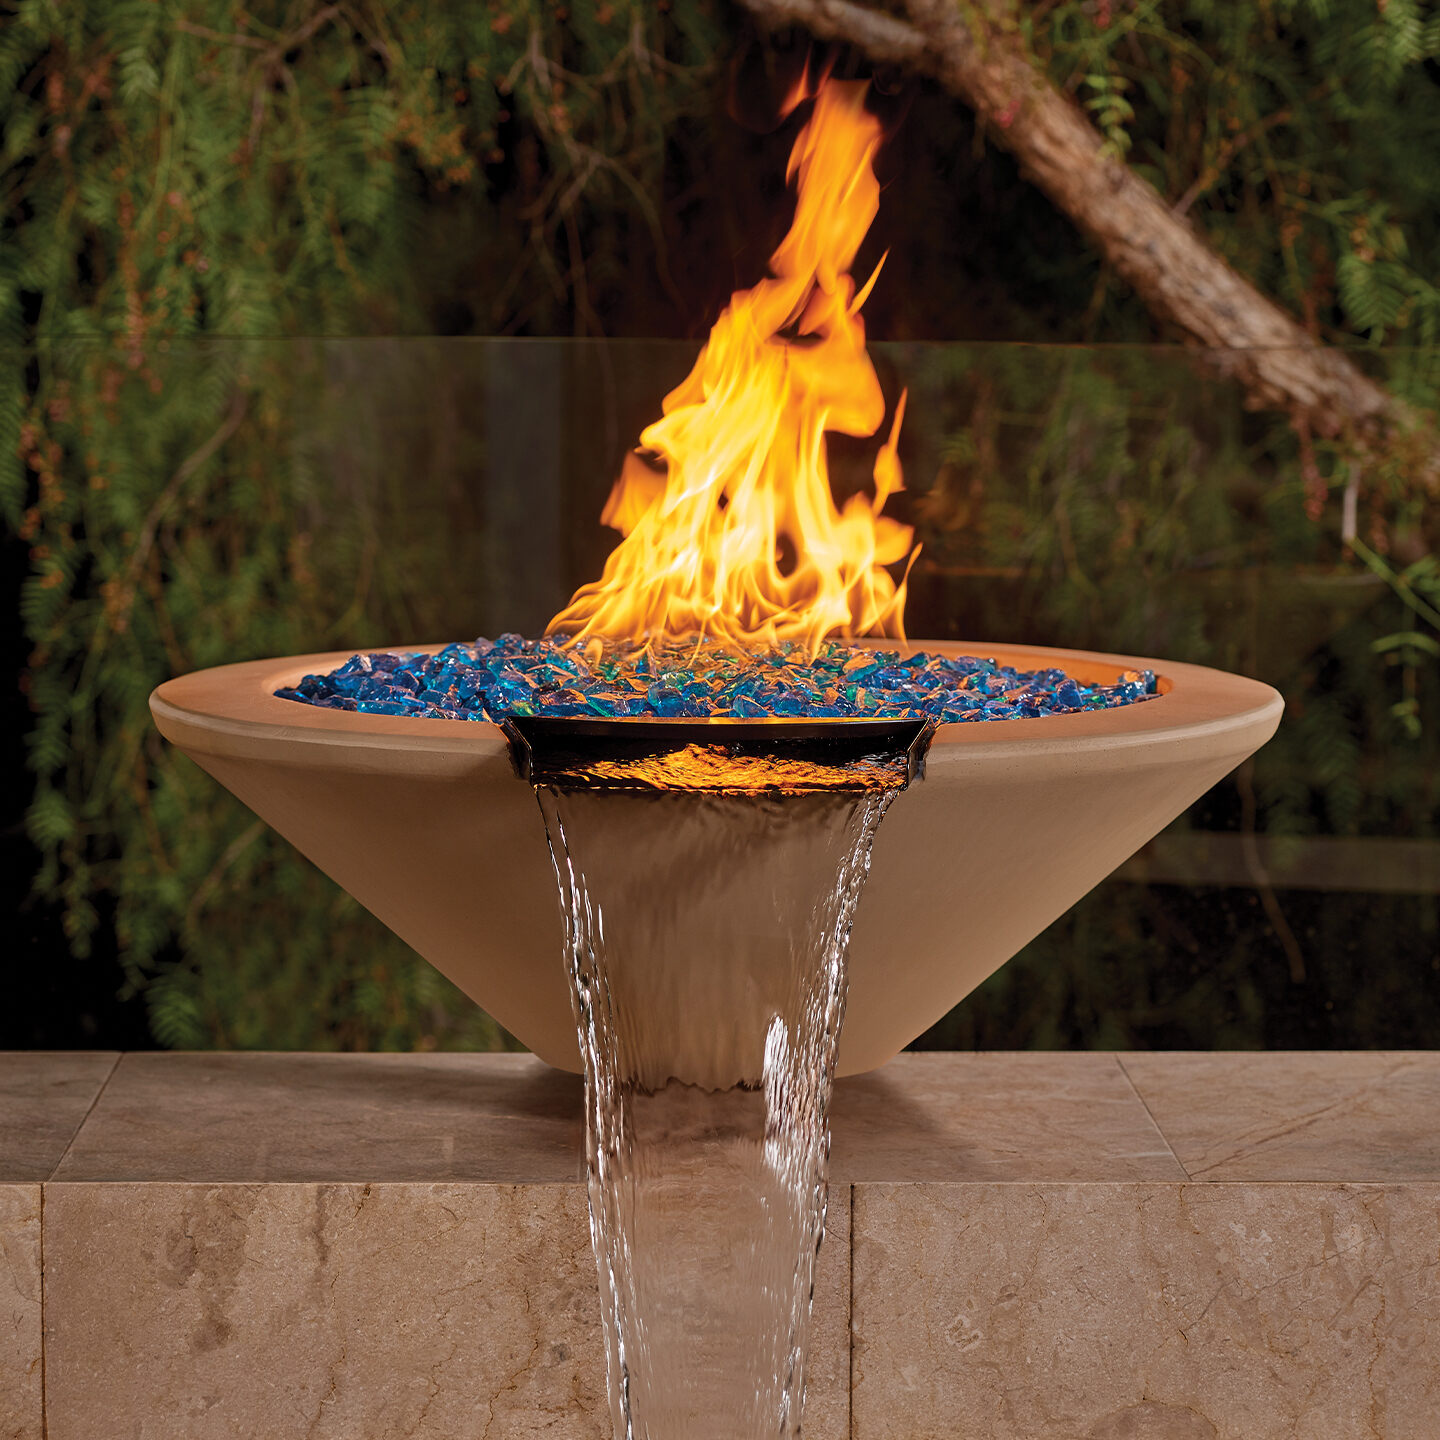 A fire bowl with colorful glass pieces and flames, featuring a water spillway, on a stone pedestal.